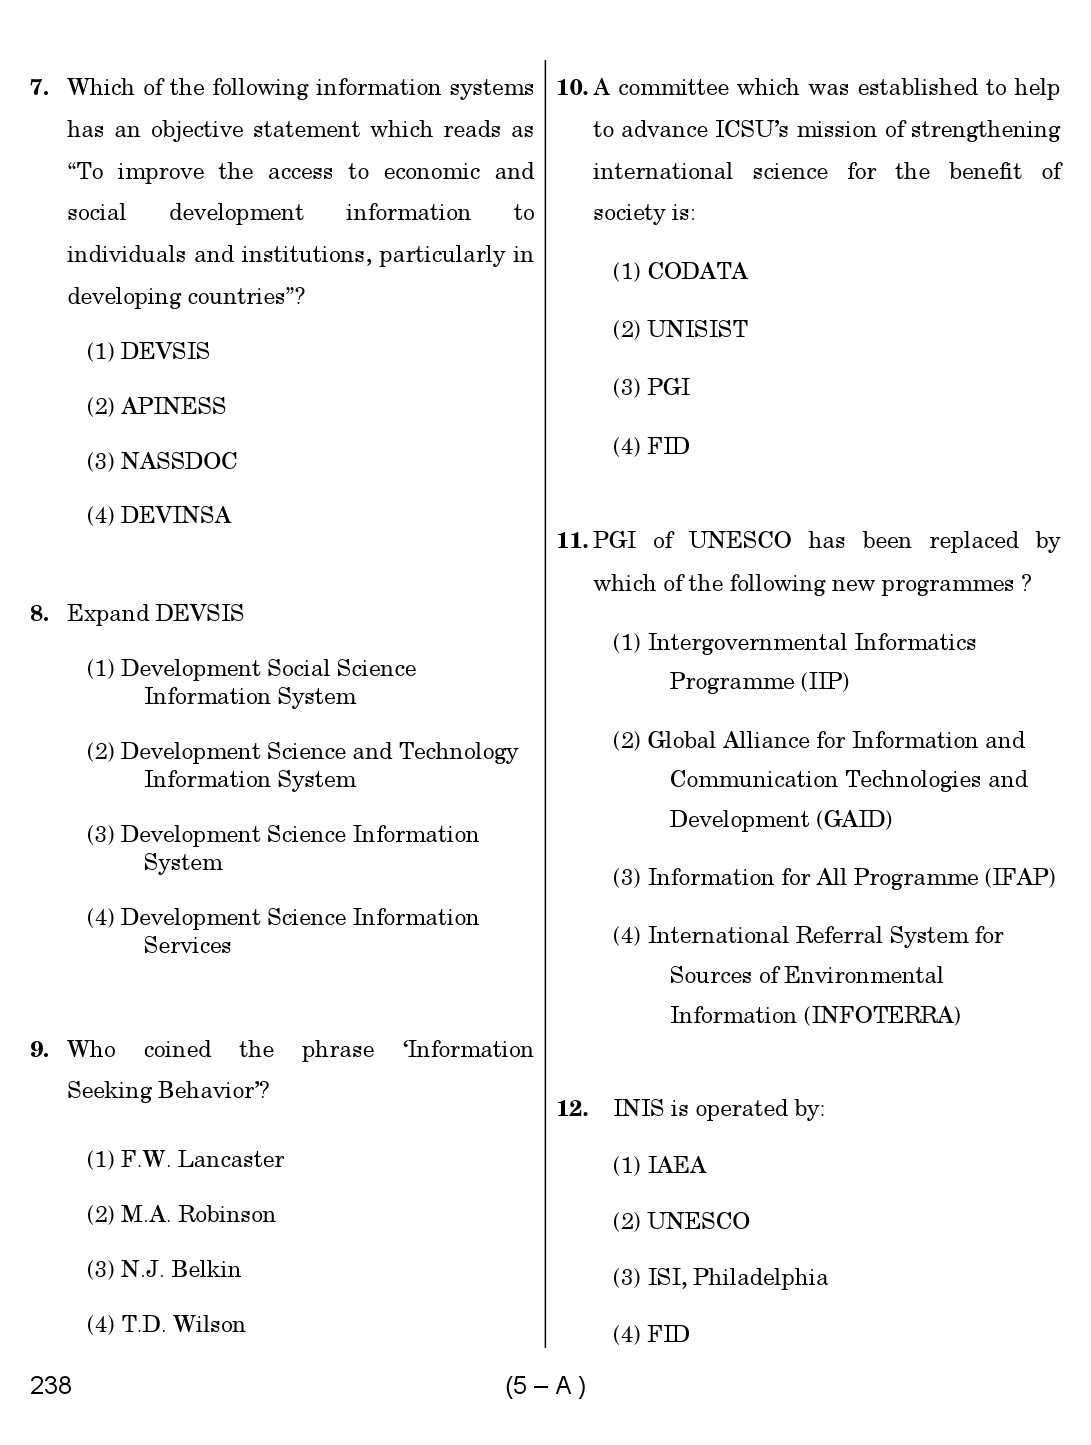 Karnataka PSC 238 Specific Paper II Librarian Exam Sample Question Paper 5